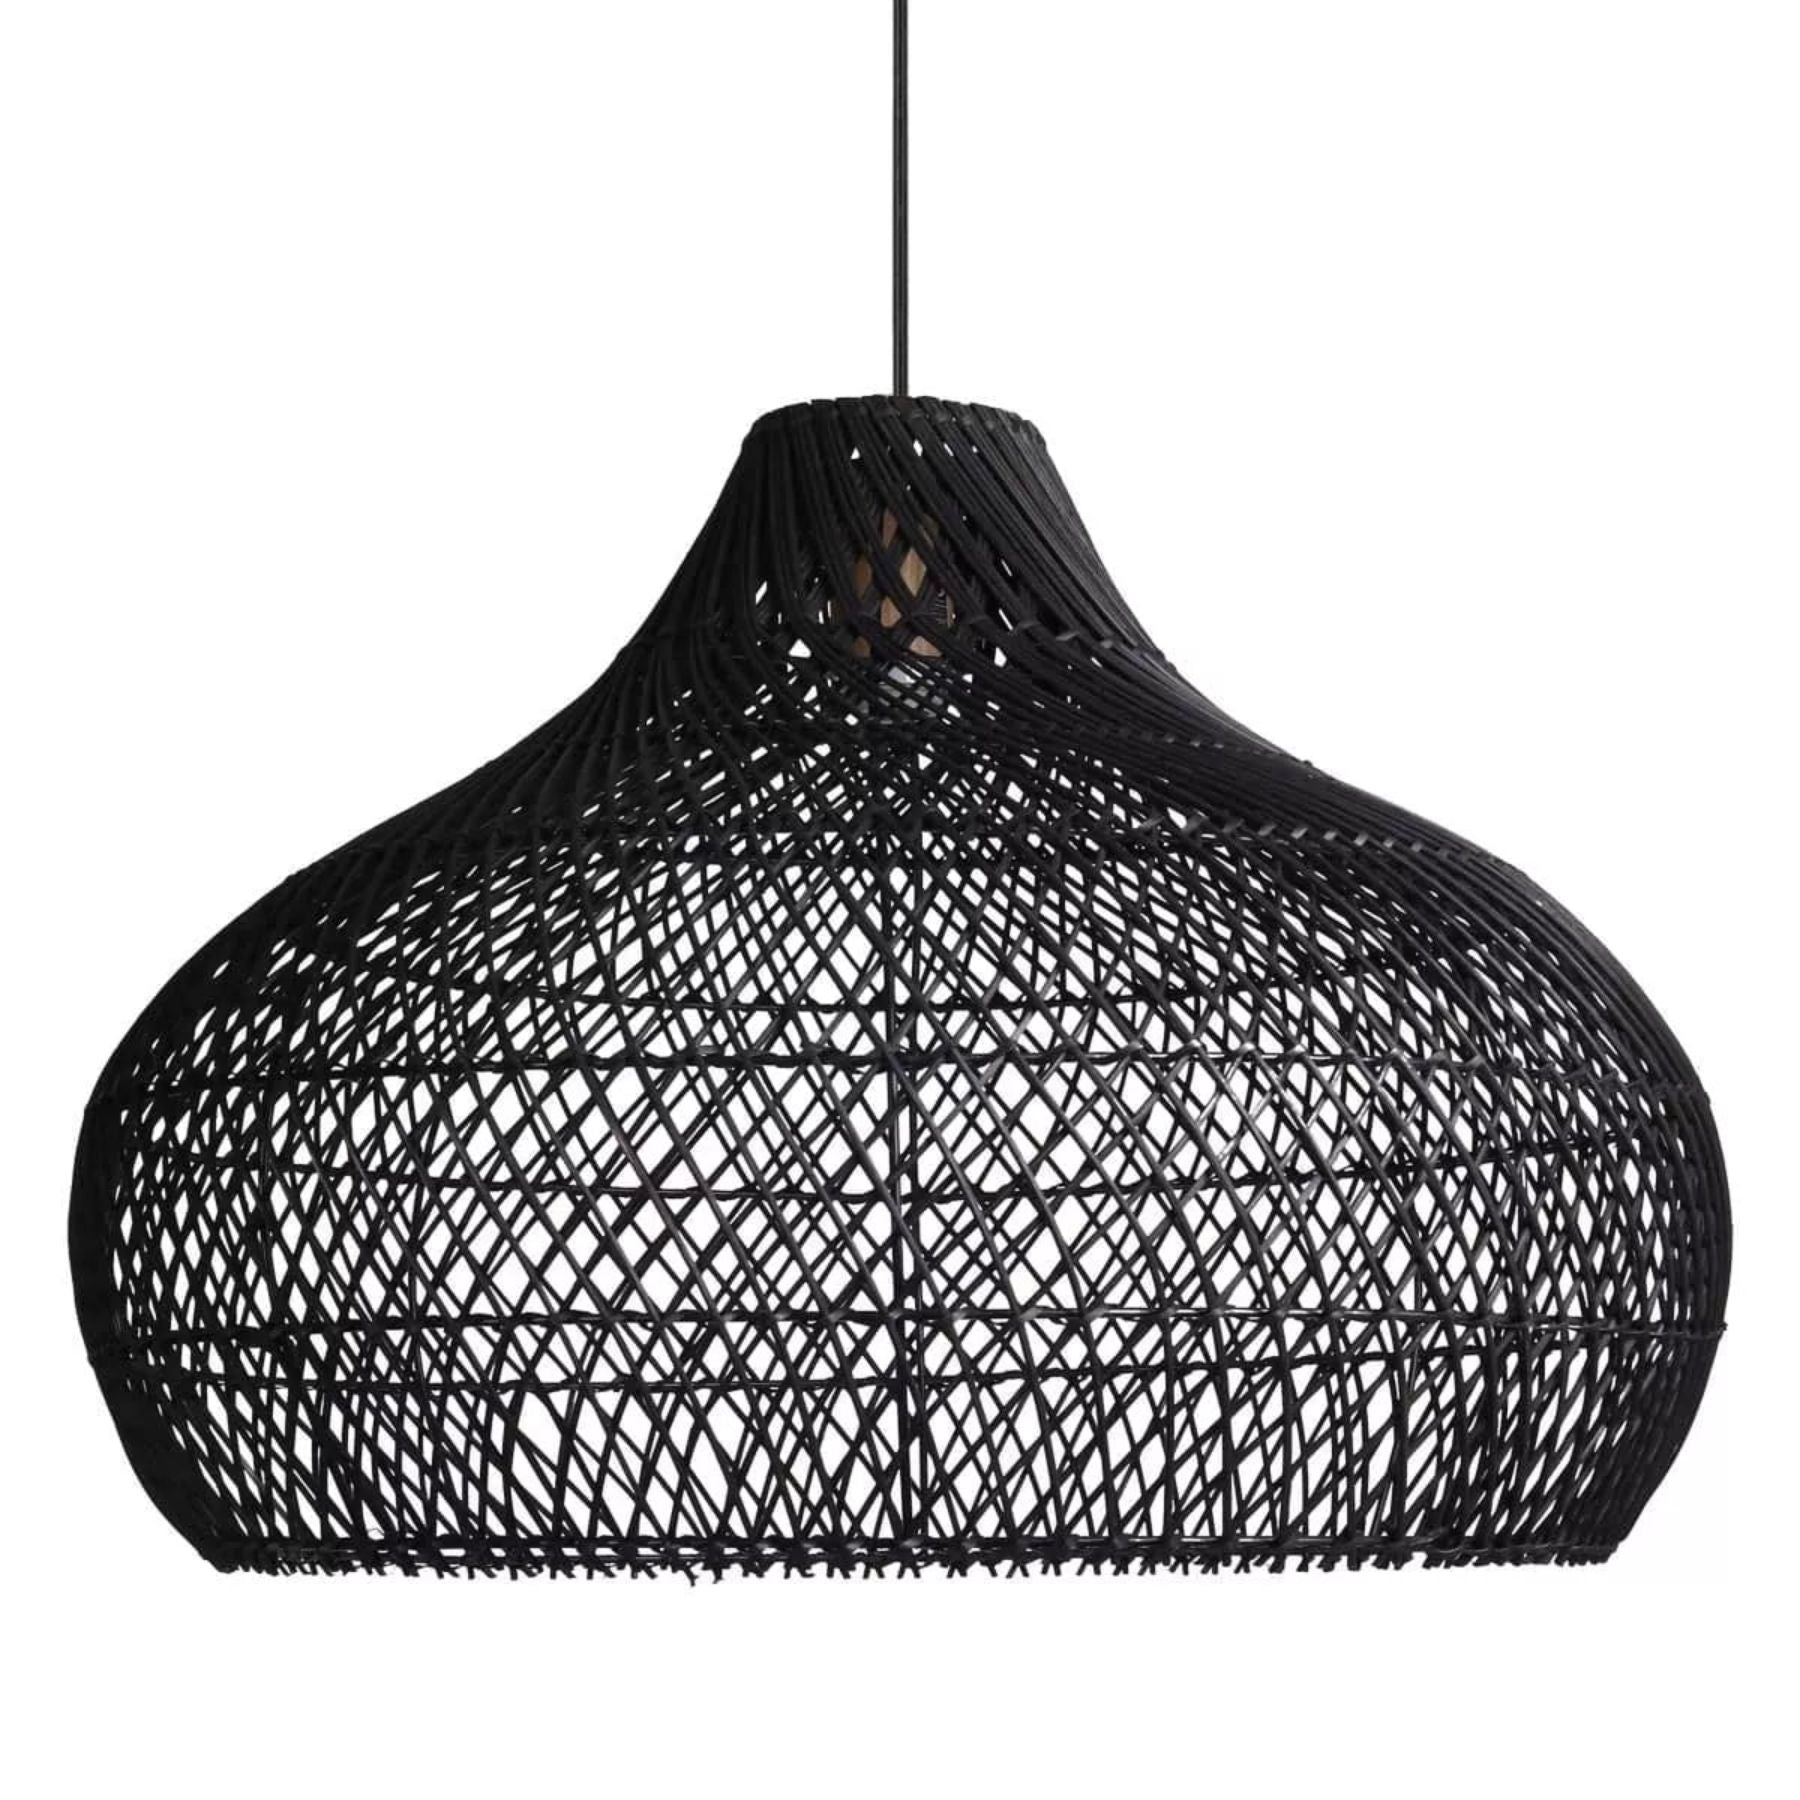 latigo rattan hanging lamp is a handmade product with the beauty of natural rattan